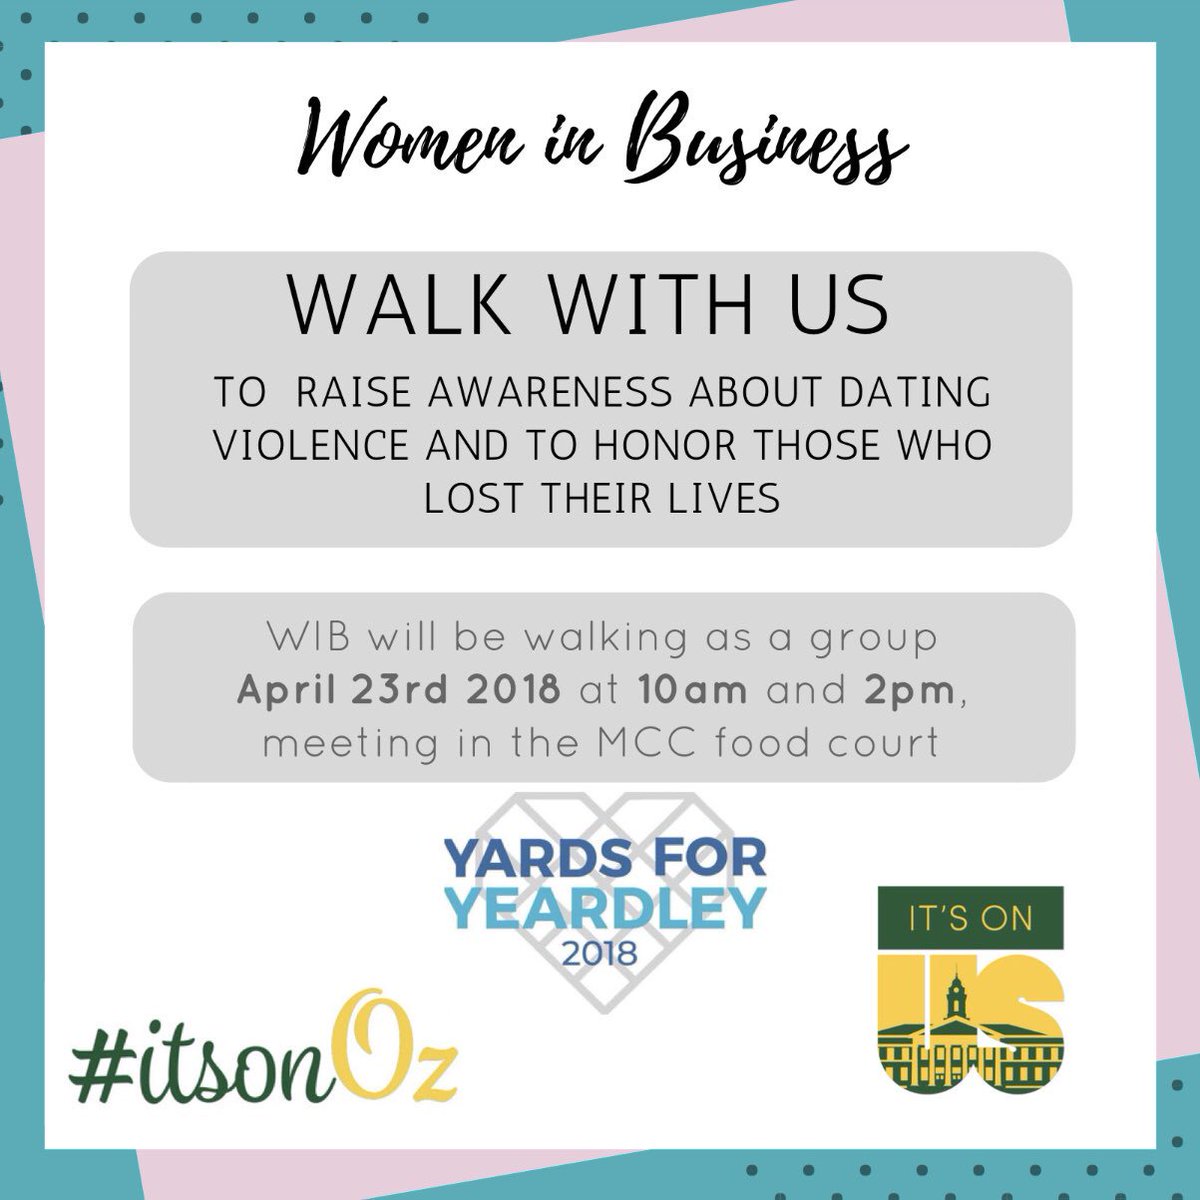 Meet us tomorrow in MCC food court to walk with WIB as a group for #YardsforYeardley #TeamOneLove 💙